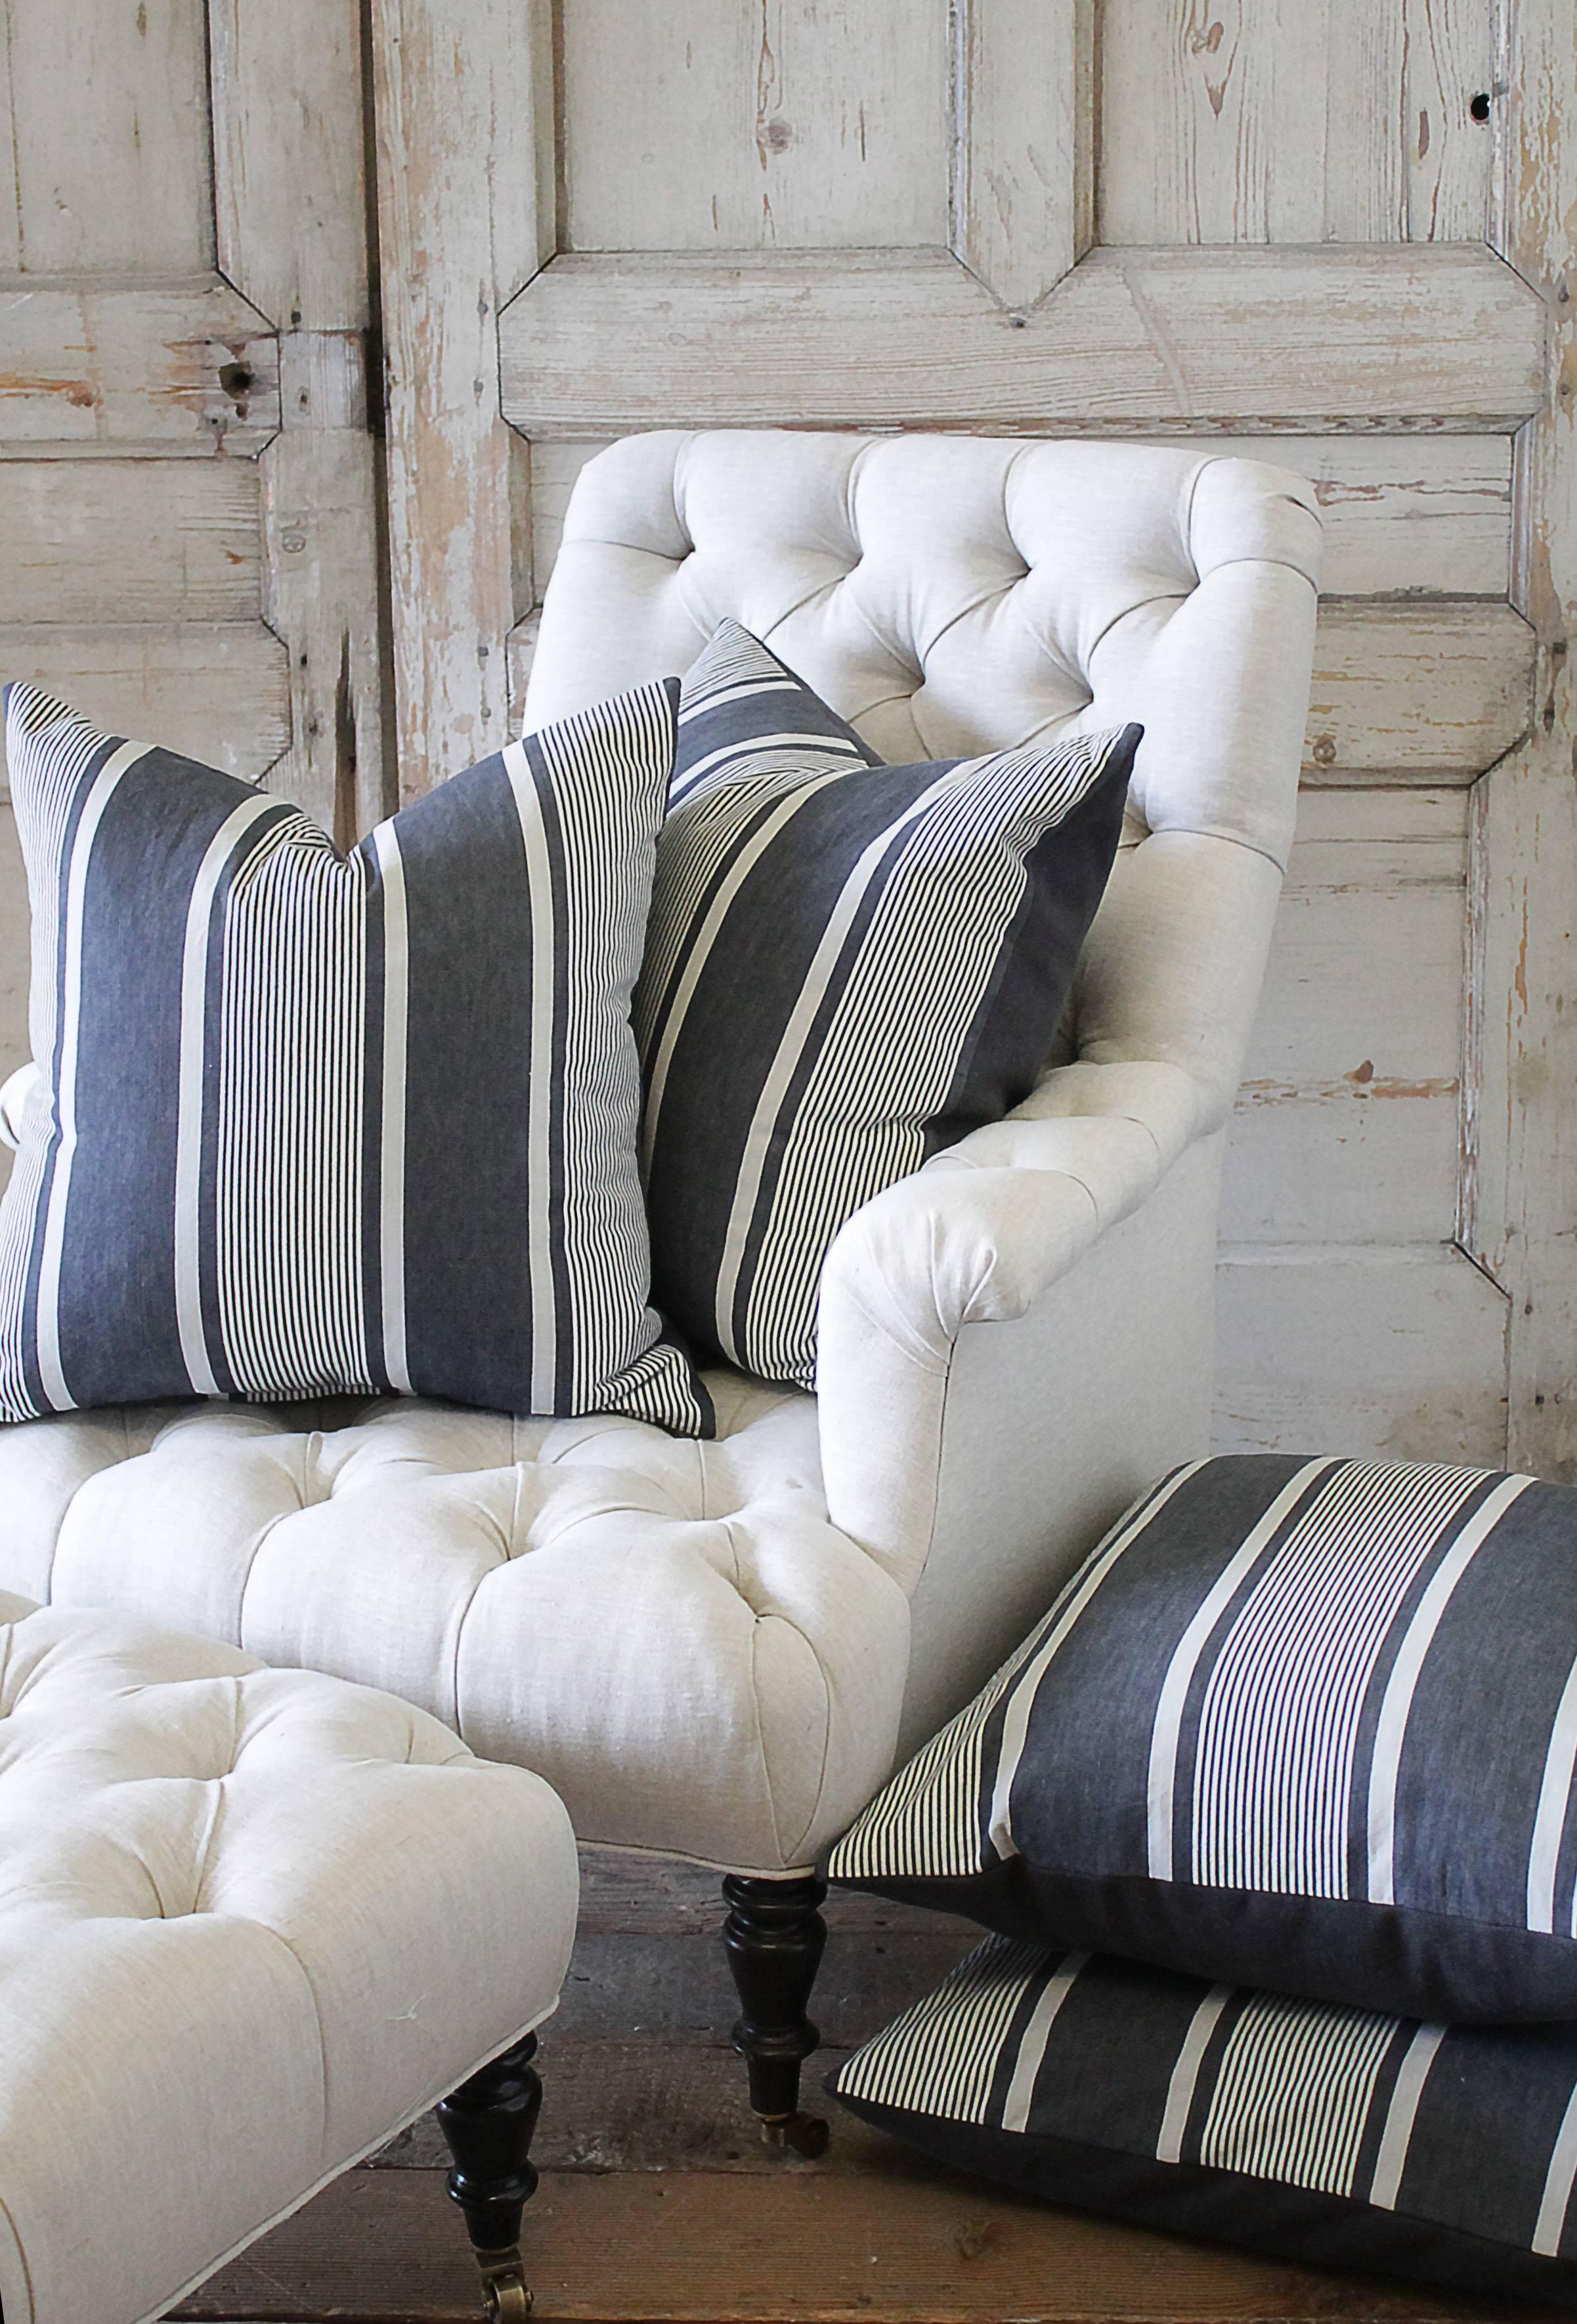 Rustic Antique French Ticking Accent Pillows in Coal For Sale